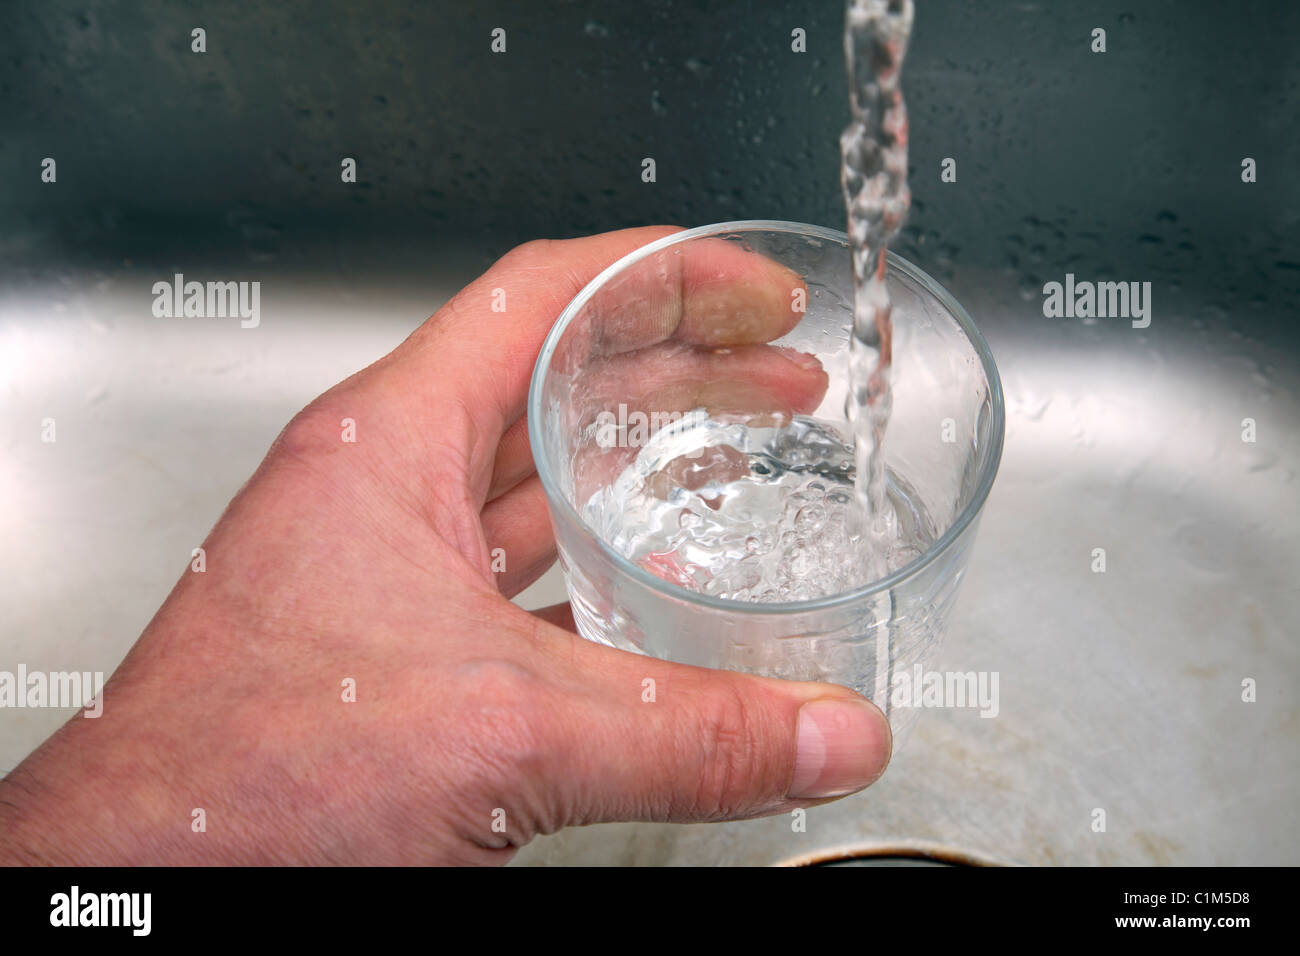 Man filling a glass with water from a kitchen tap. Stock Photo